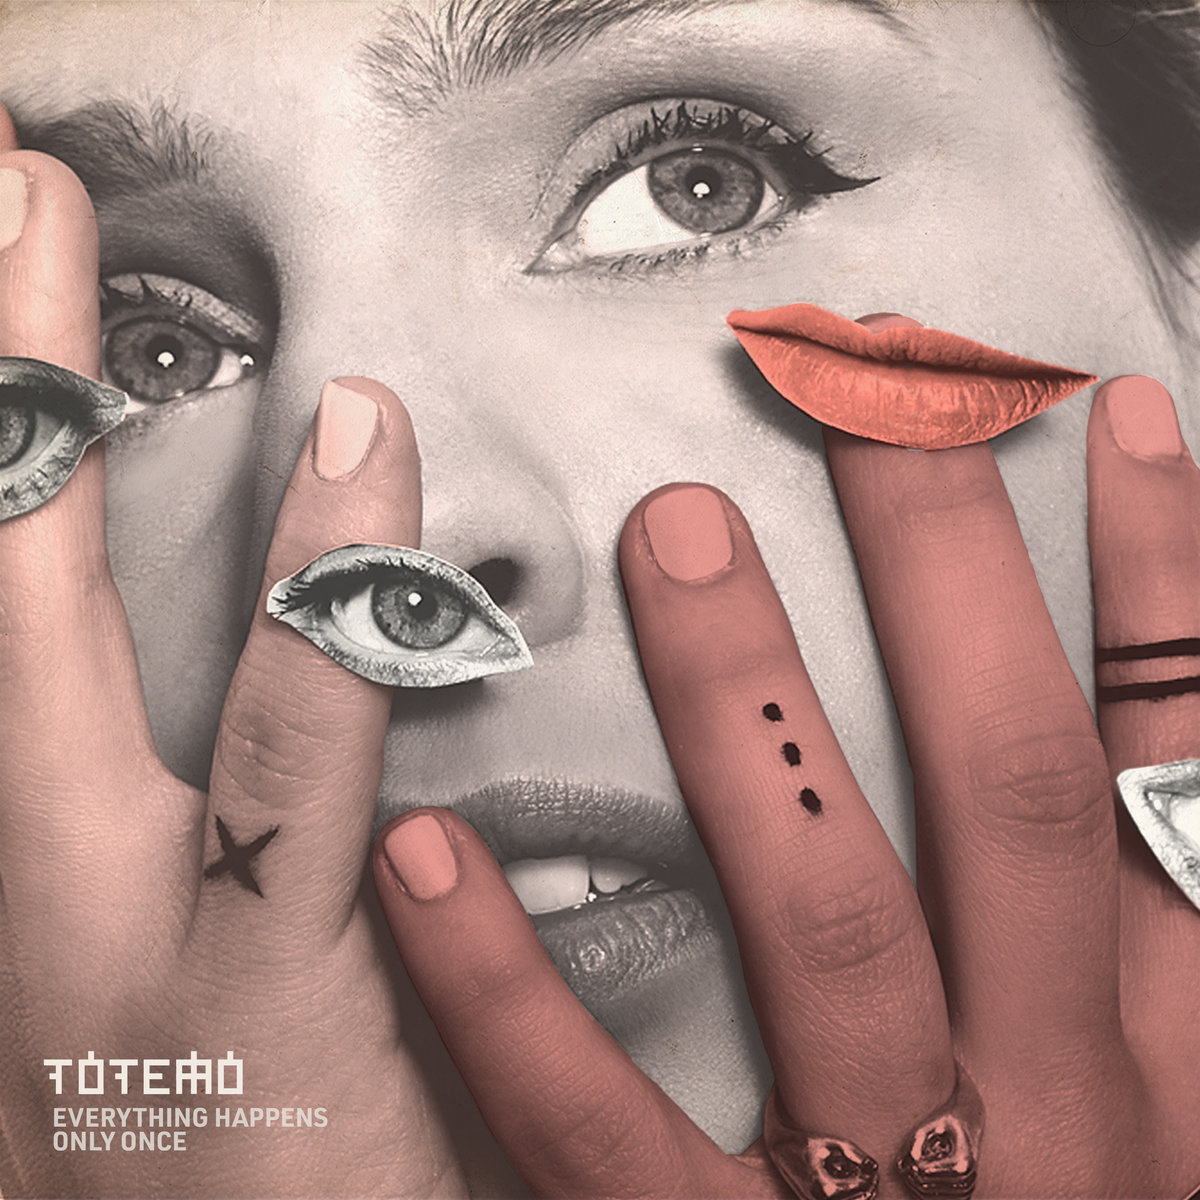 Totemo - Everything Happens Only Once